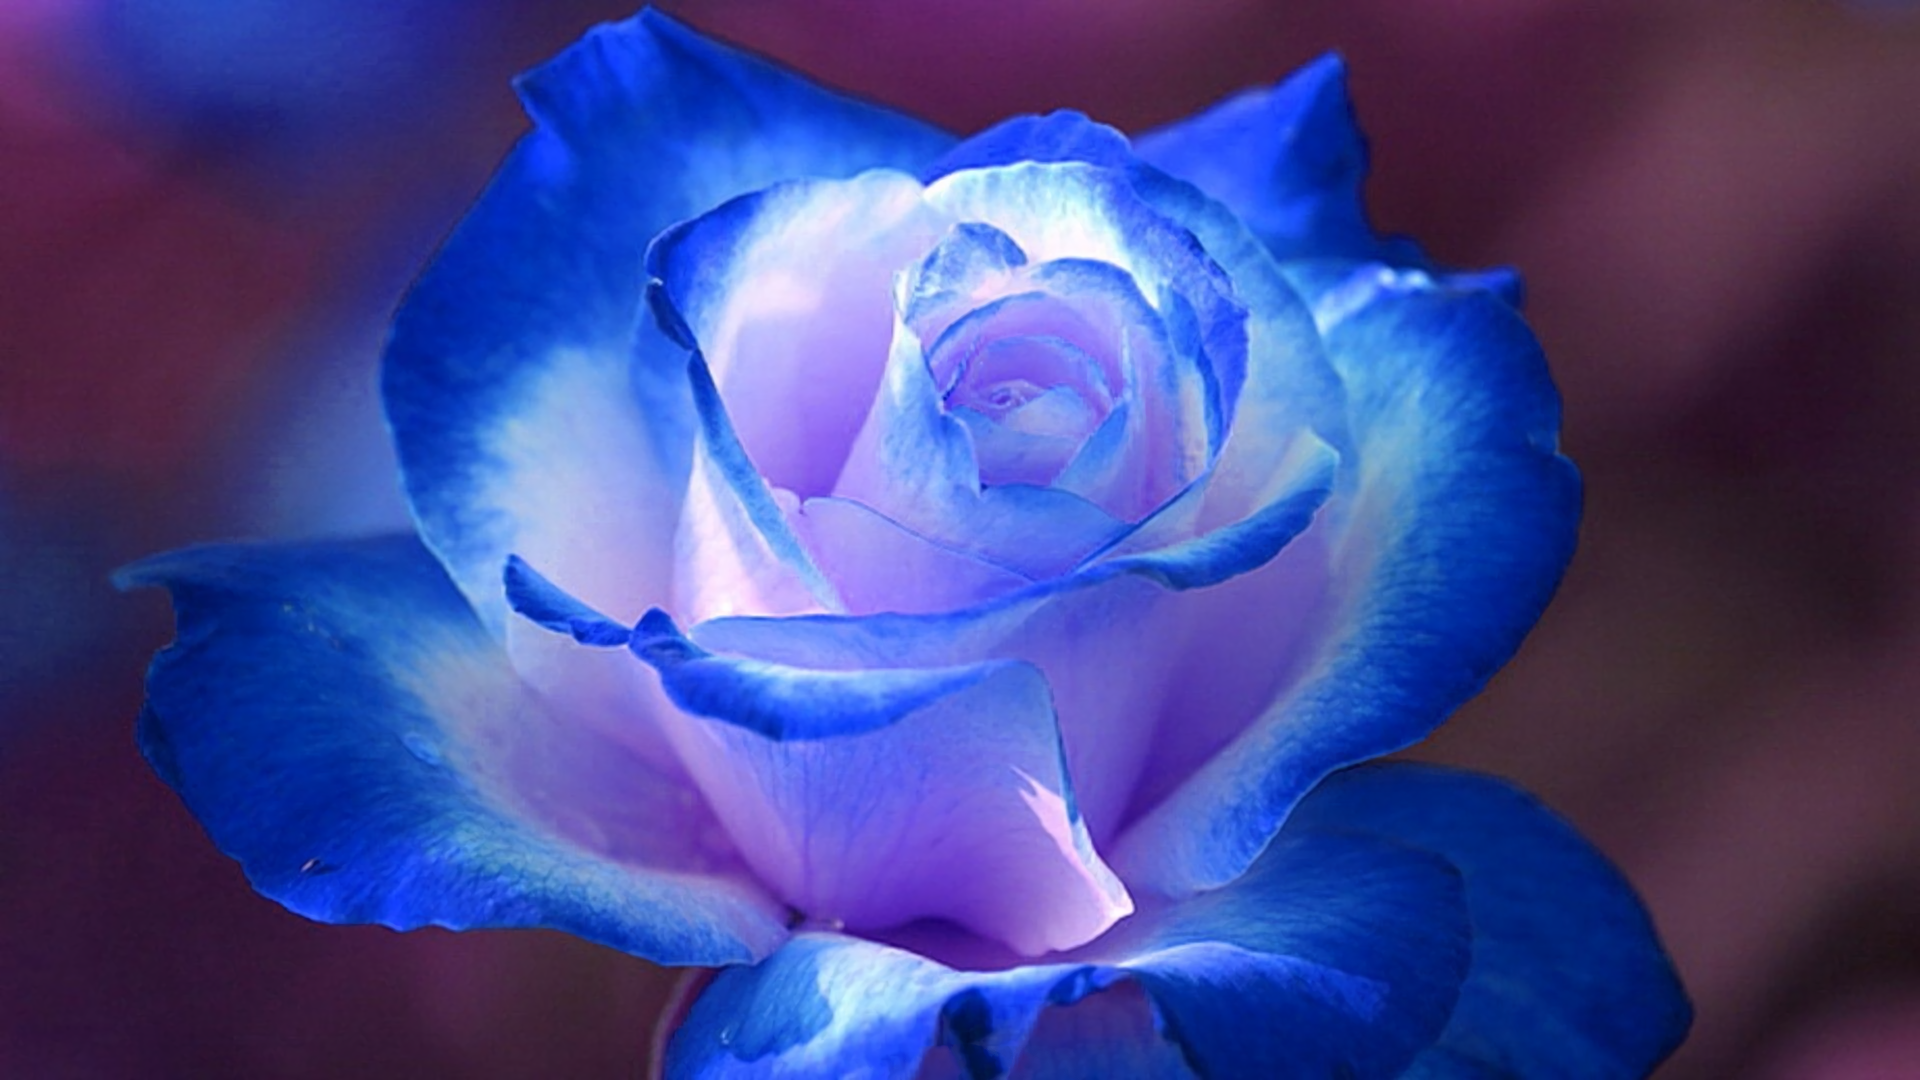 Rose Full HD, HDTV, 1080p 16:9 Wallpapers, HD Rose 1920x1080 Backgrounds,  Free Images Download